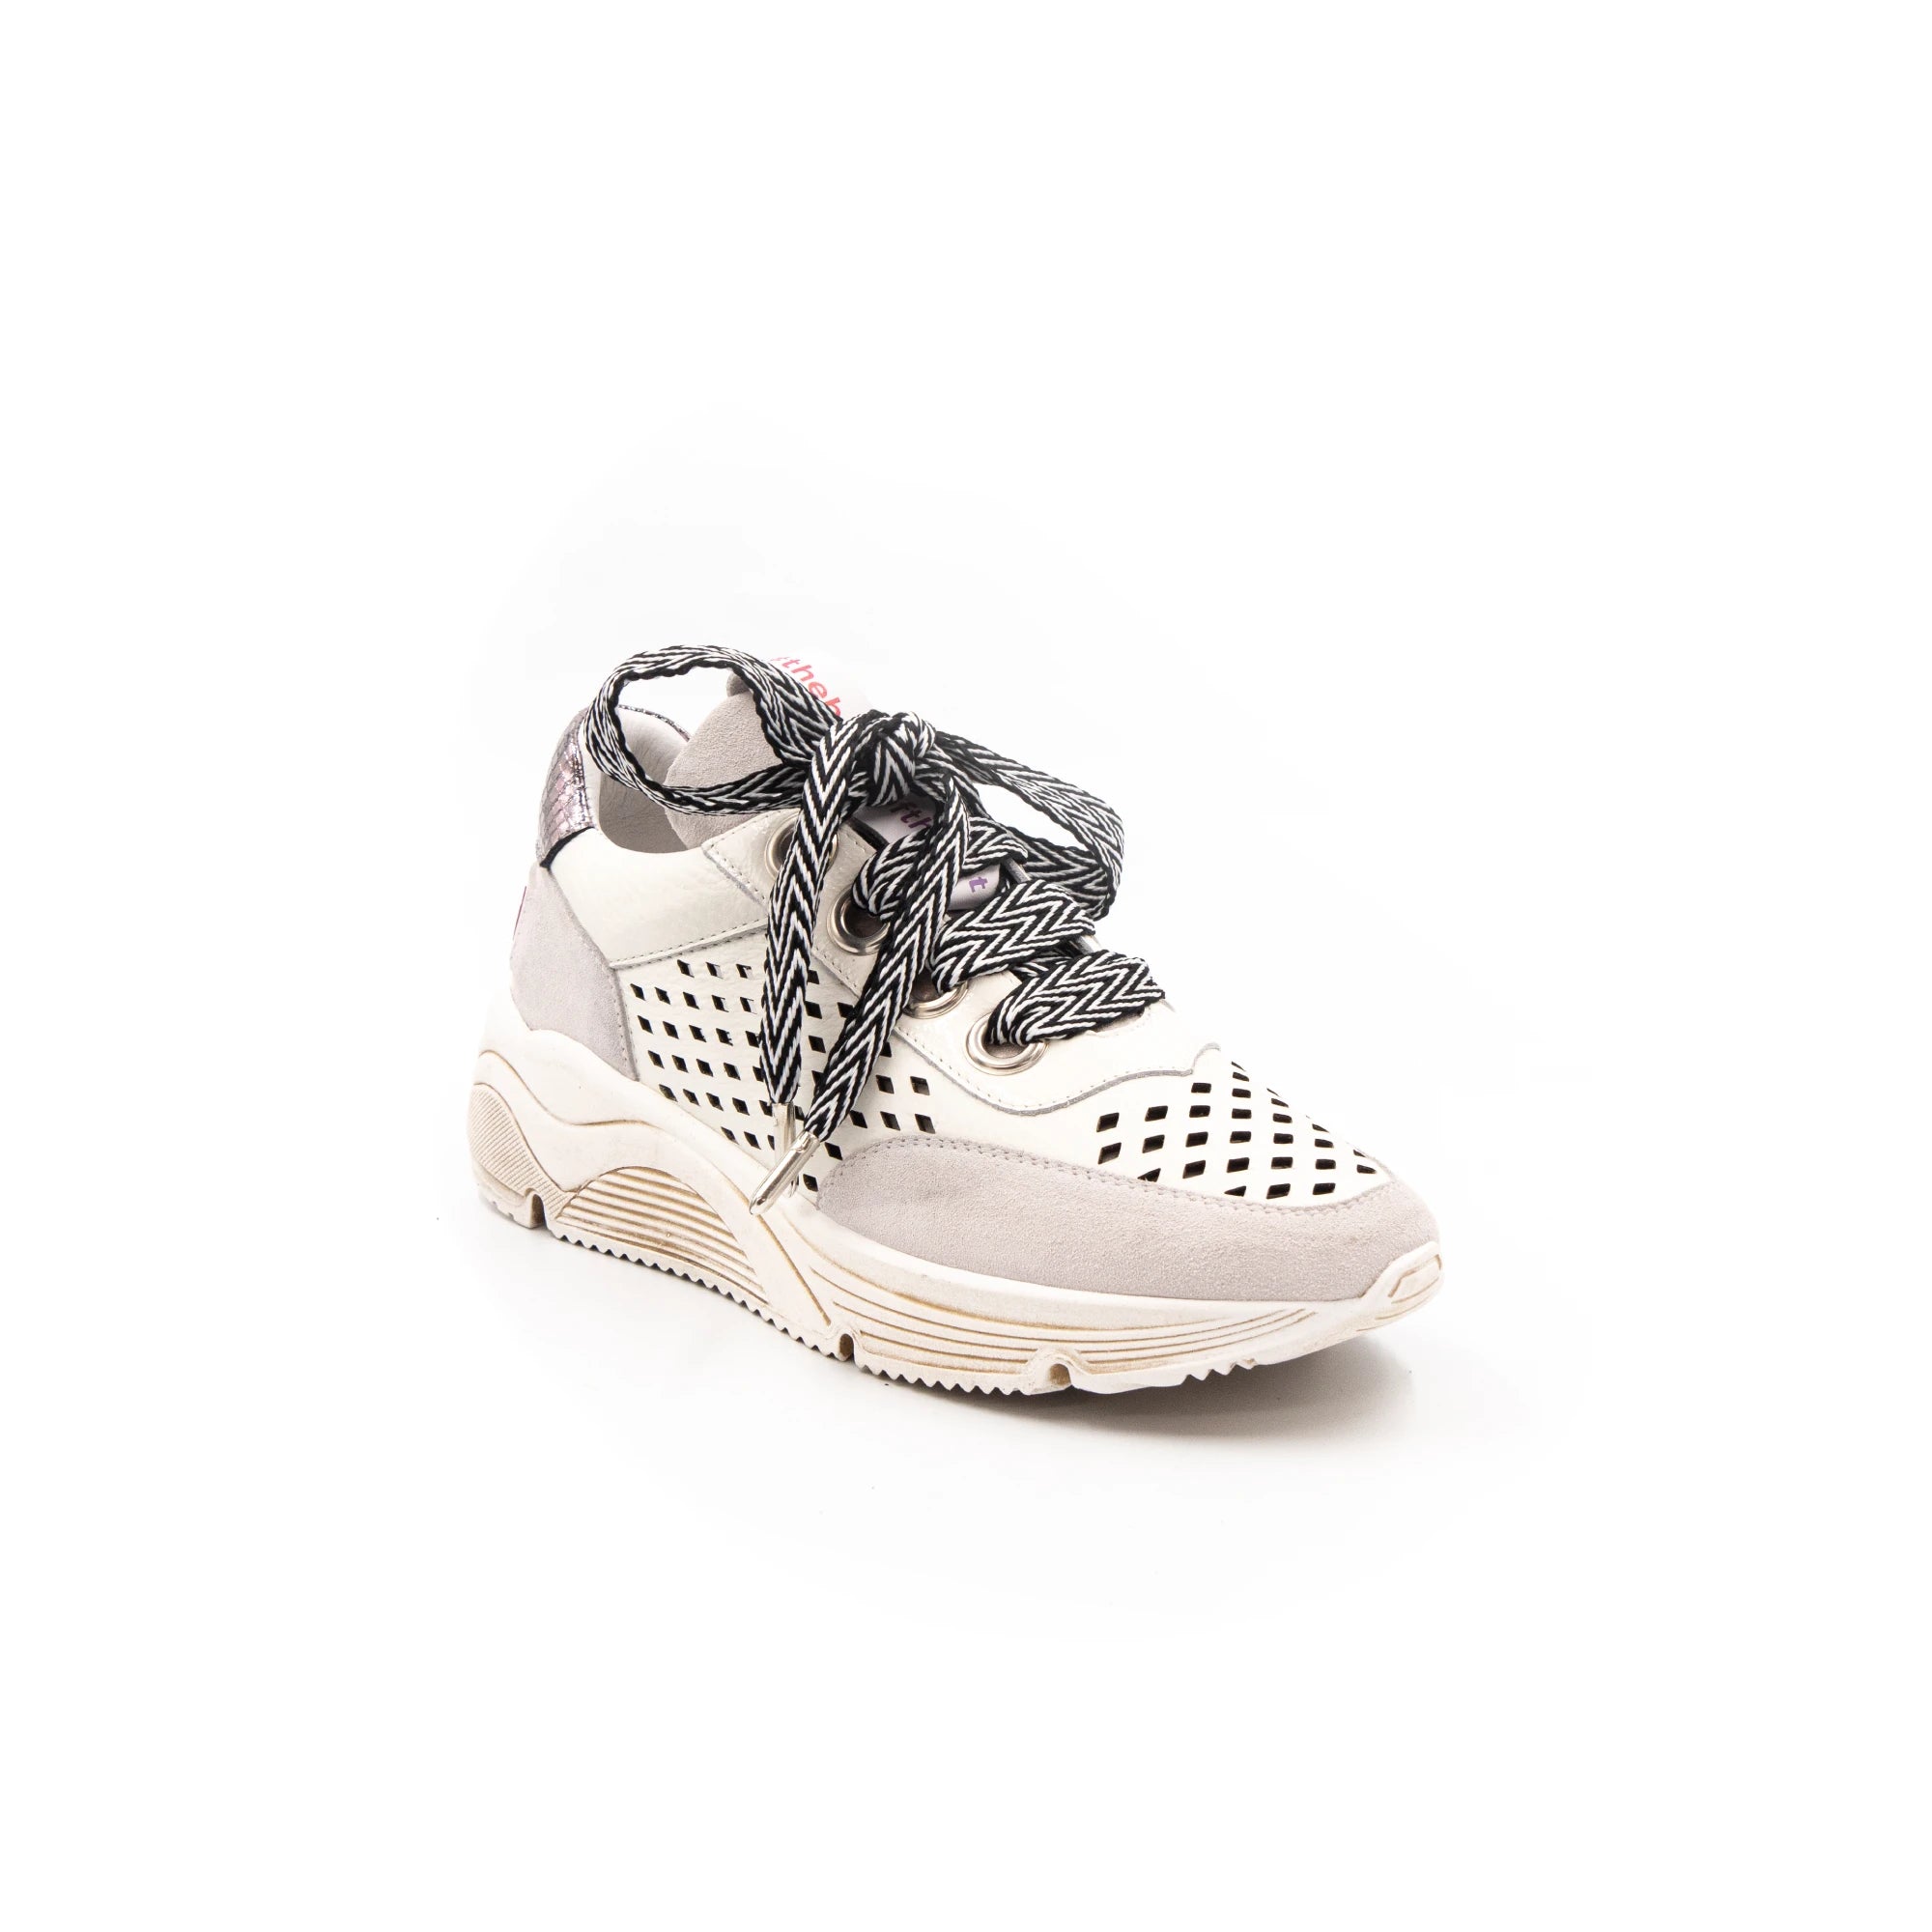 White perforated sneakers.